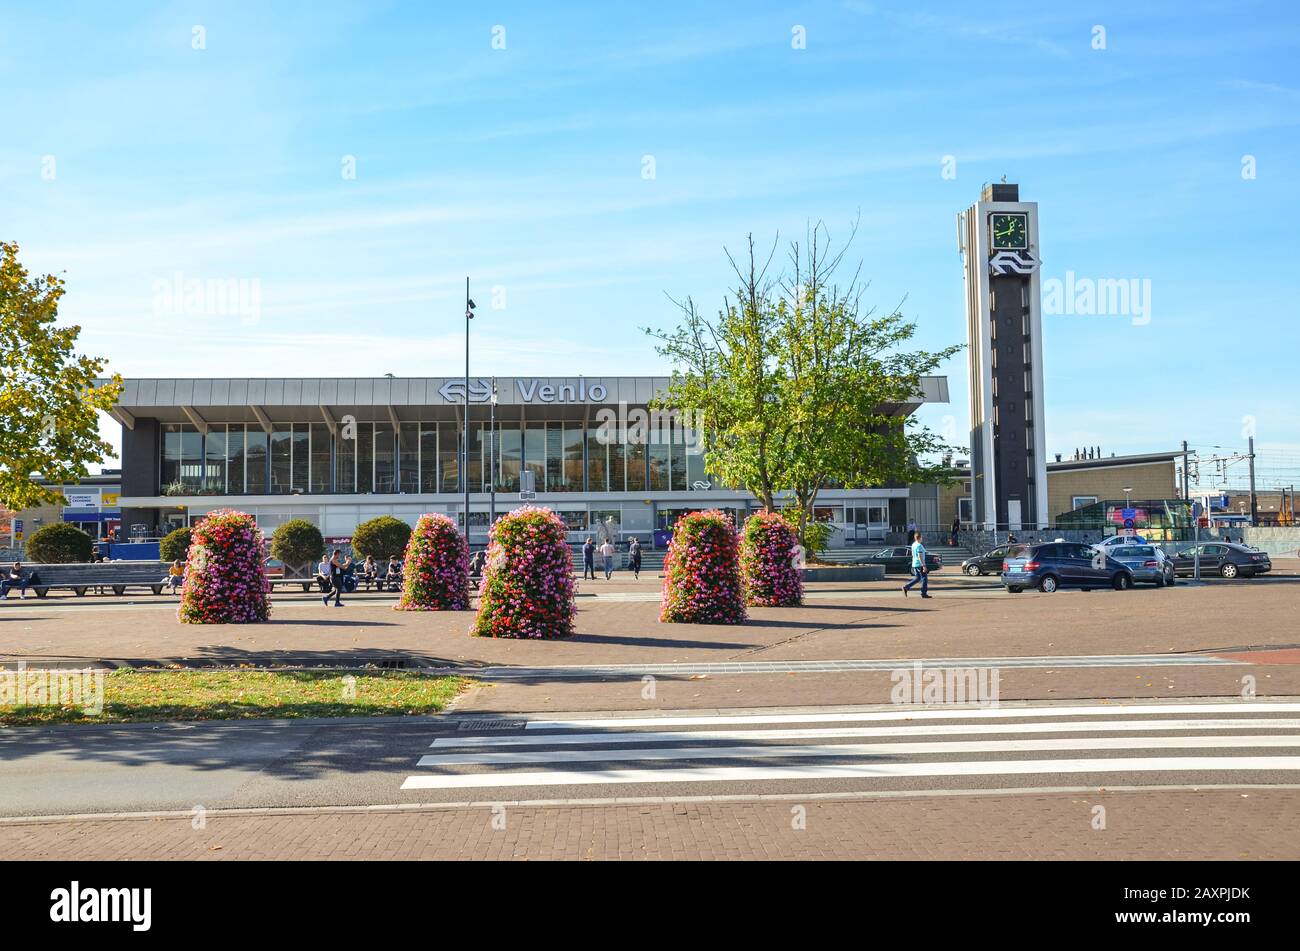 Venlo, Limburg, Netherlands - October 13, 2018: Zebra crossing and sidewalk leading to the main train station building in the Dutch city. Flower decorations, parked cars, people on the street. Stock Photo